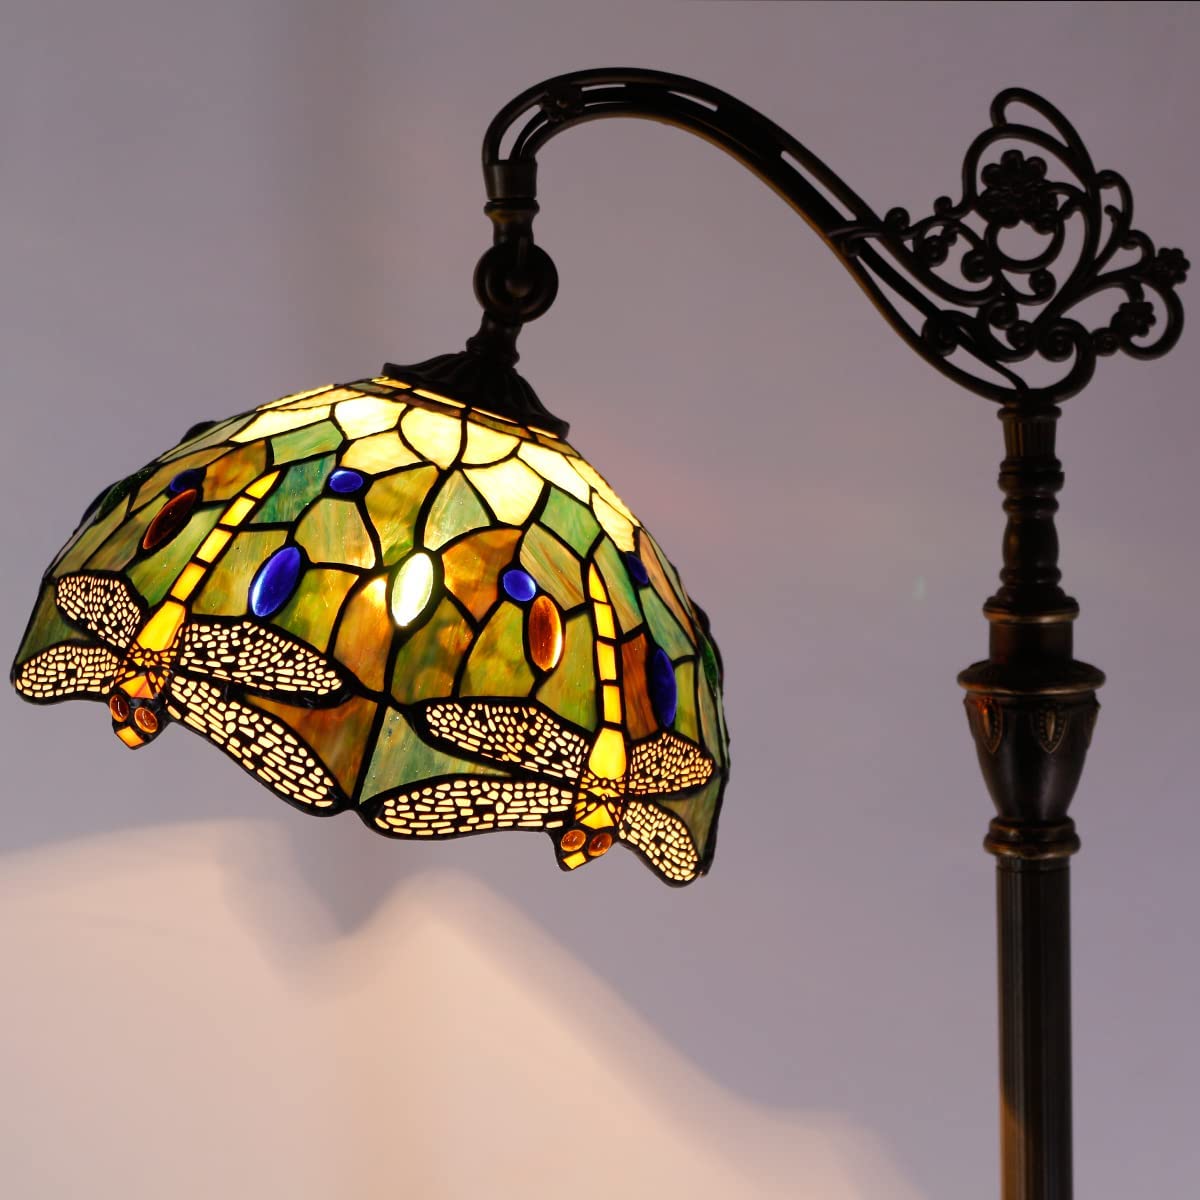 Werfactory® Tiffany Floor lamp, 67 Inch high Dragonfly Style Stained Glass Arched Gooseneck Lamp